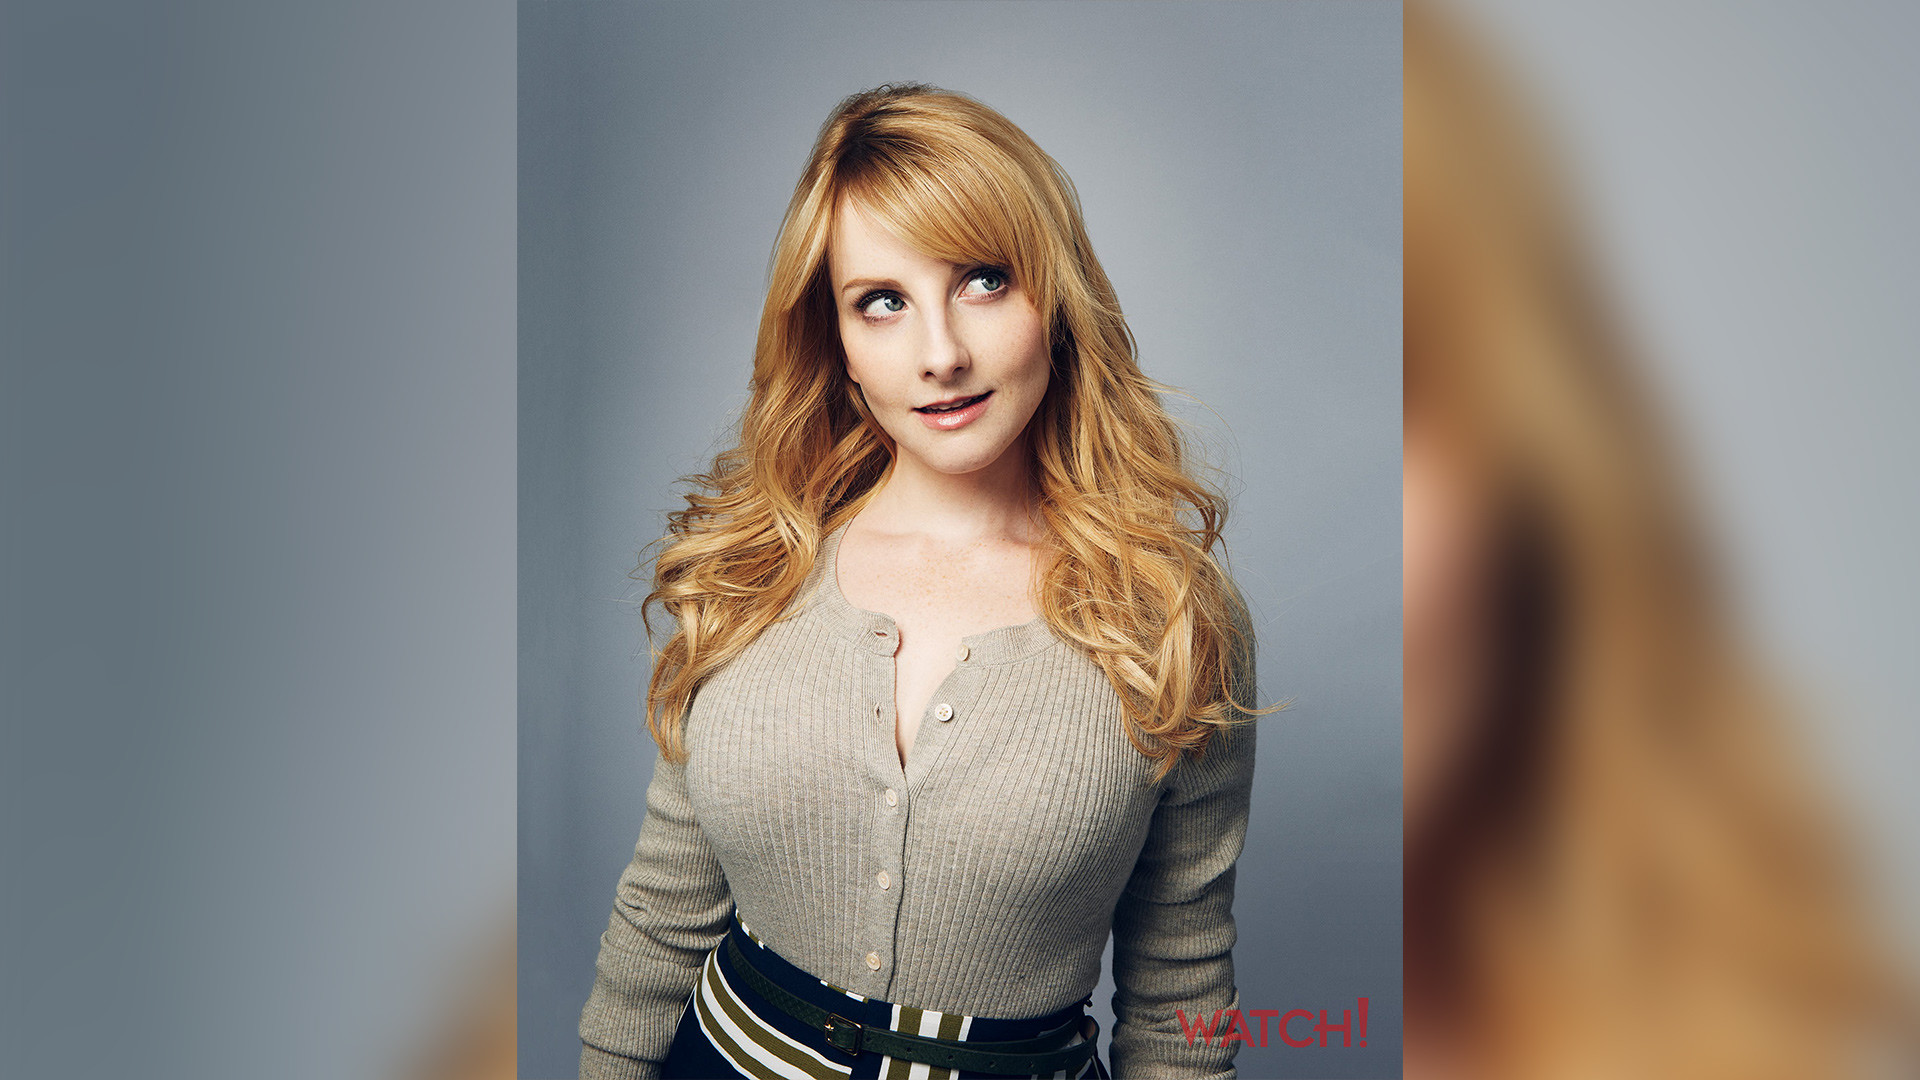 1920x1080 Melissa Rauch Of The Big Bang Theory Is Mesmerizing In These Photos -  Watch! Magazine Photos - CBS.com